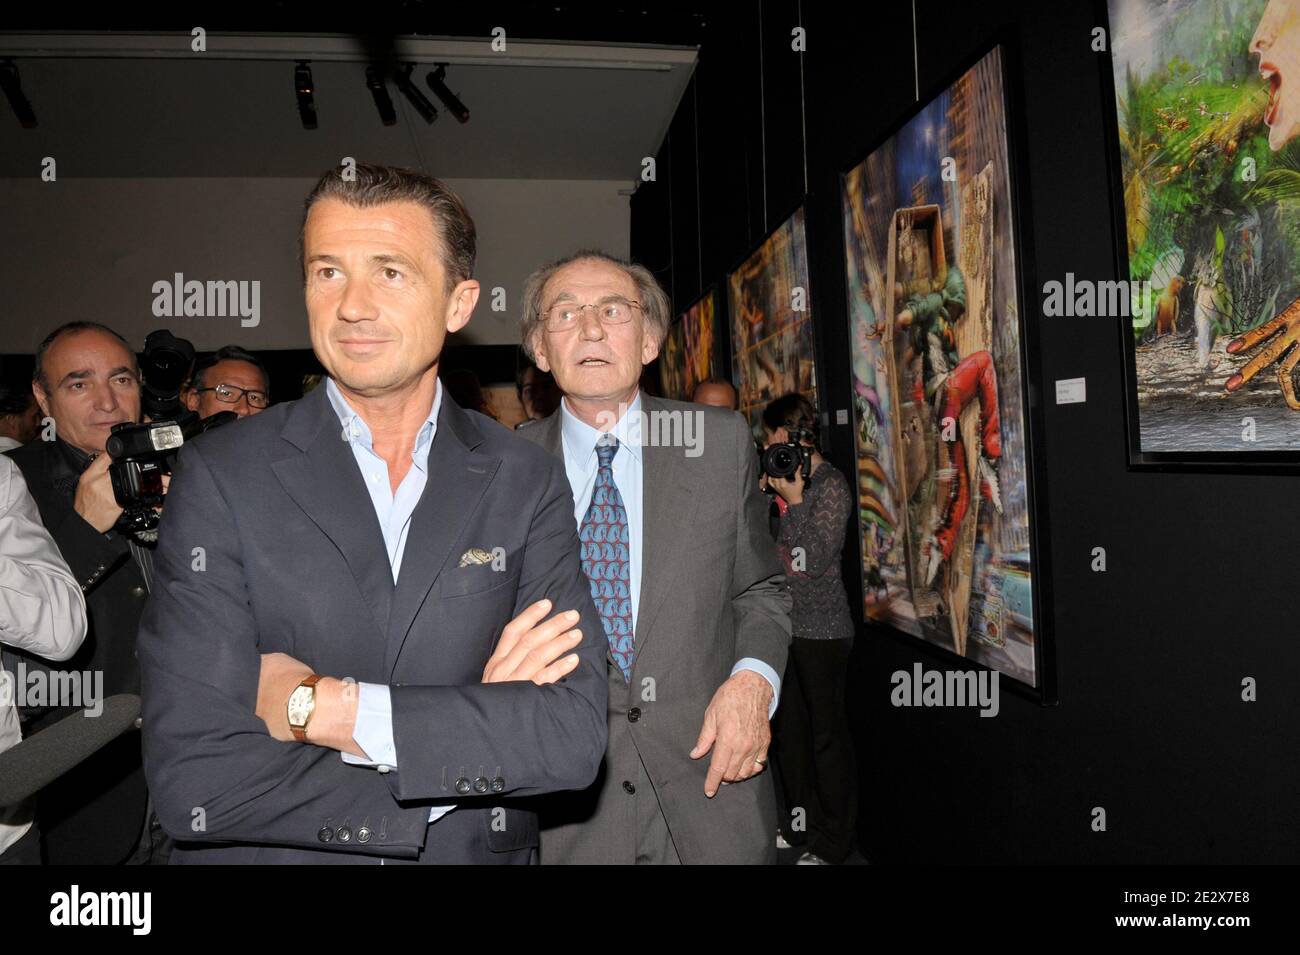 Francois and Pal Sarkozy attending the opening of the 'Entente Subtile' painting exhibition by Pal Sarkozy and Werner Hornung at the Espace Pierre Cardin in Paris, France, on April 24, 2010. Photo by Giancarlo Gorassini/ABACAPRESS.COM Stock Photo